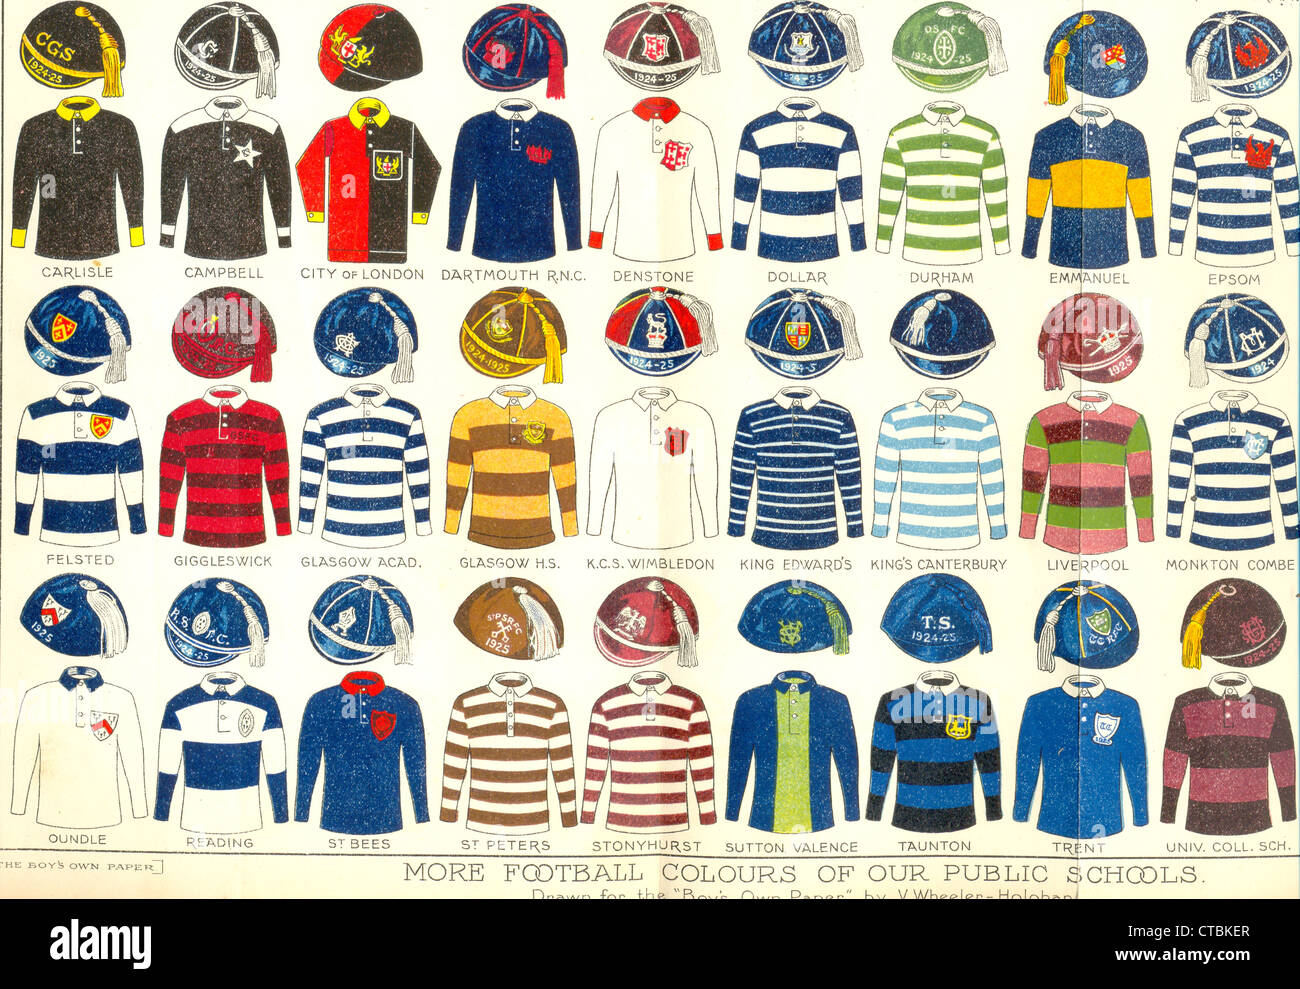 Colour plate of Football Colours of our Public Schools Stock Photo